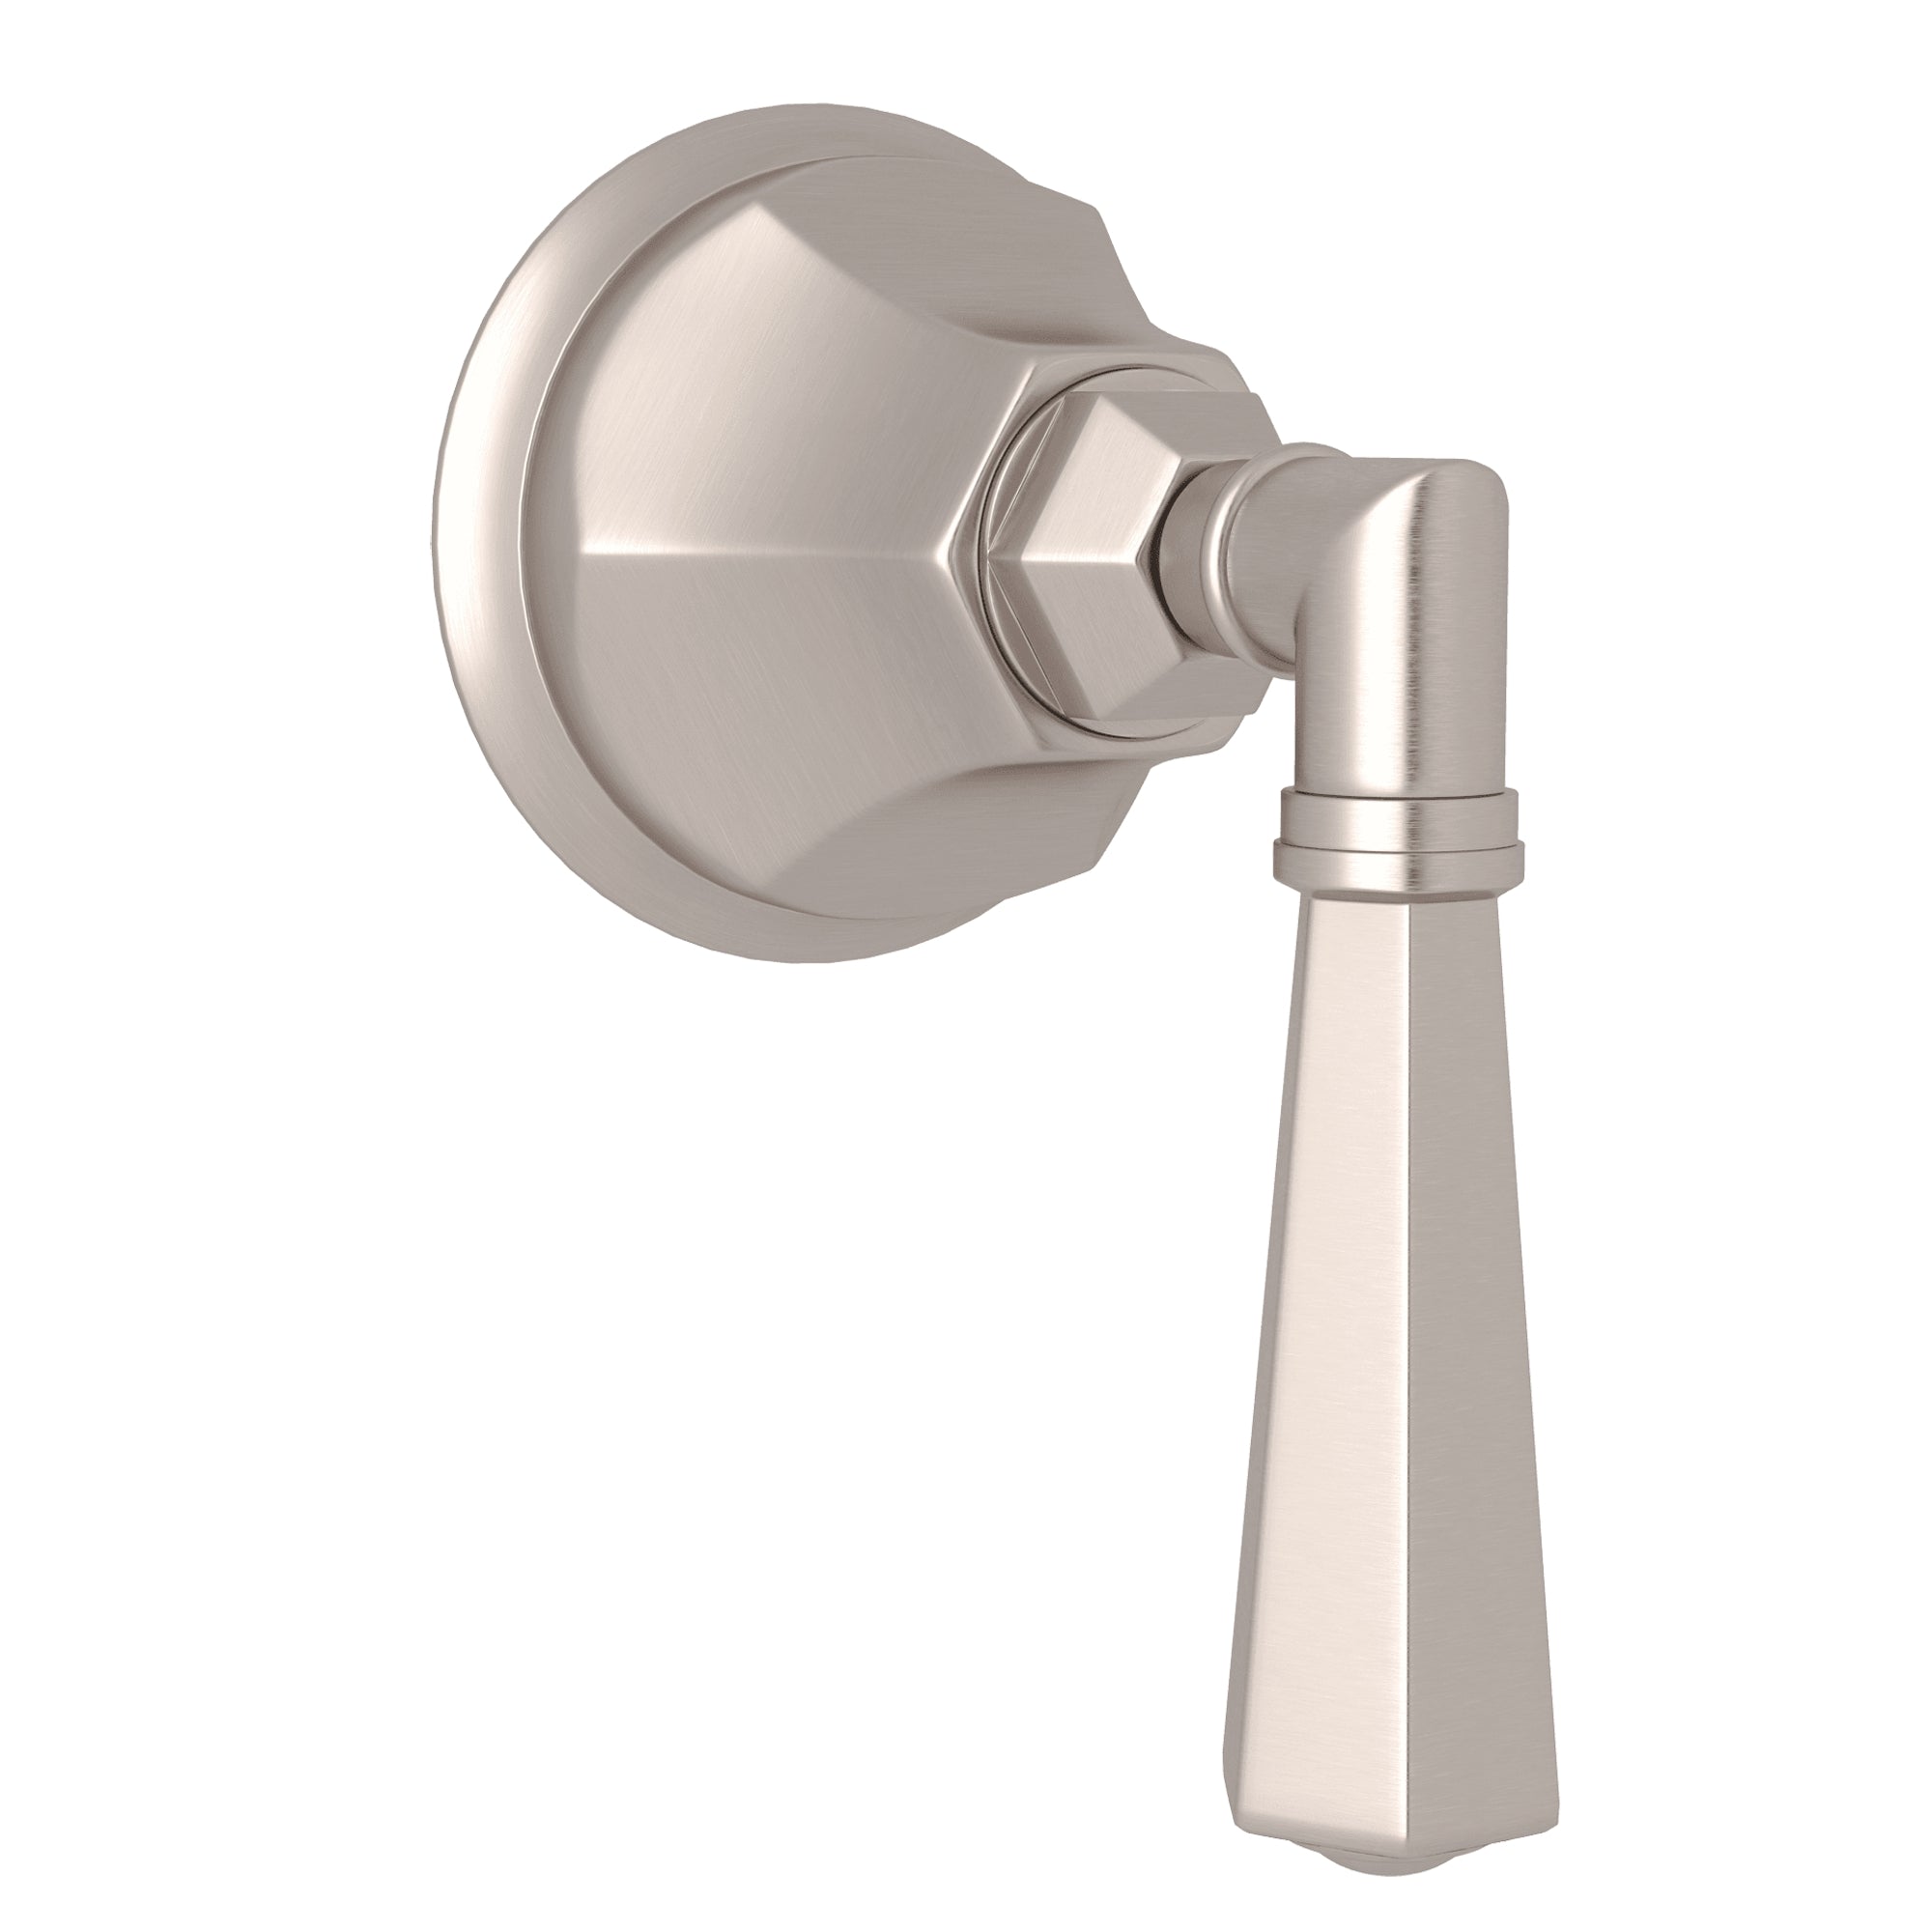 ROHL A4812 Palladian Trim For Volume Control And Diverter